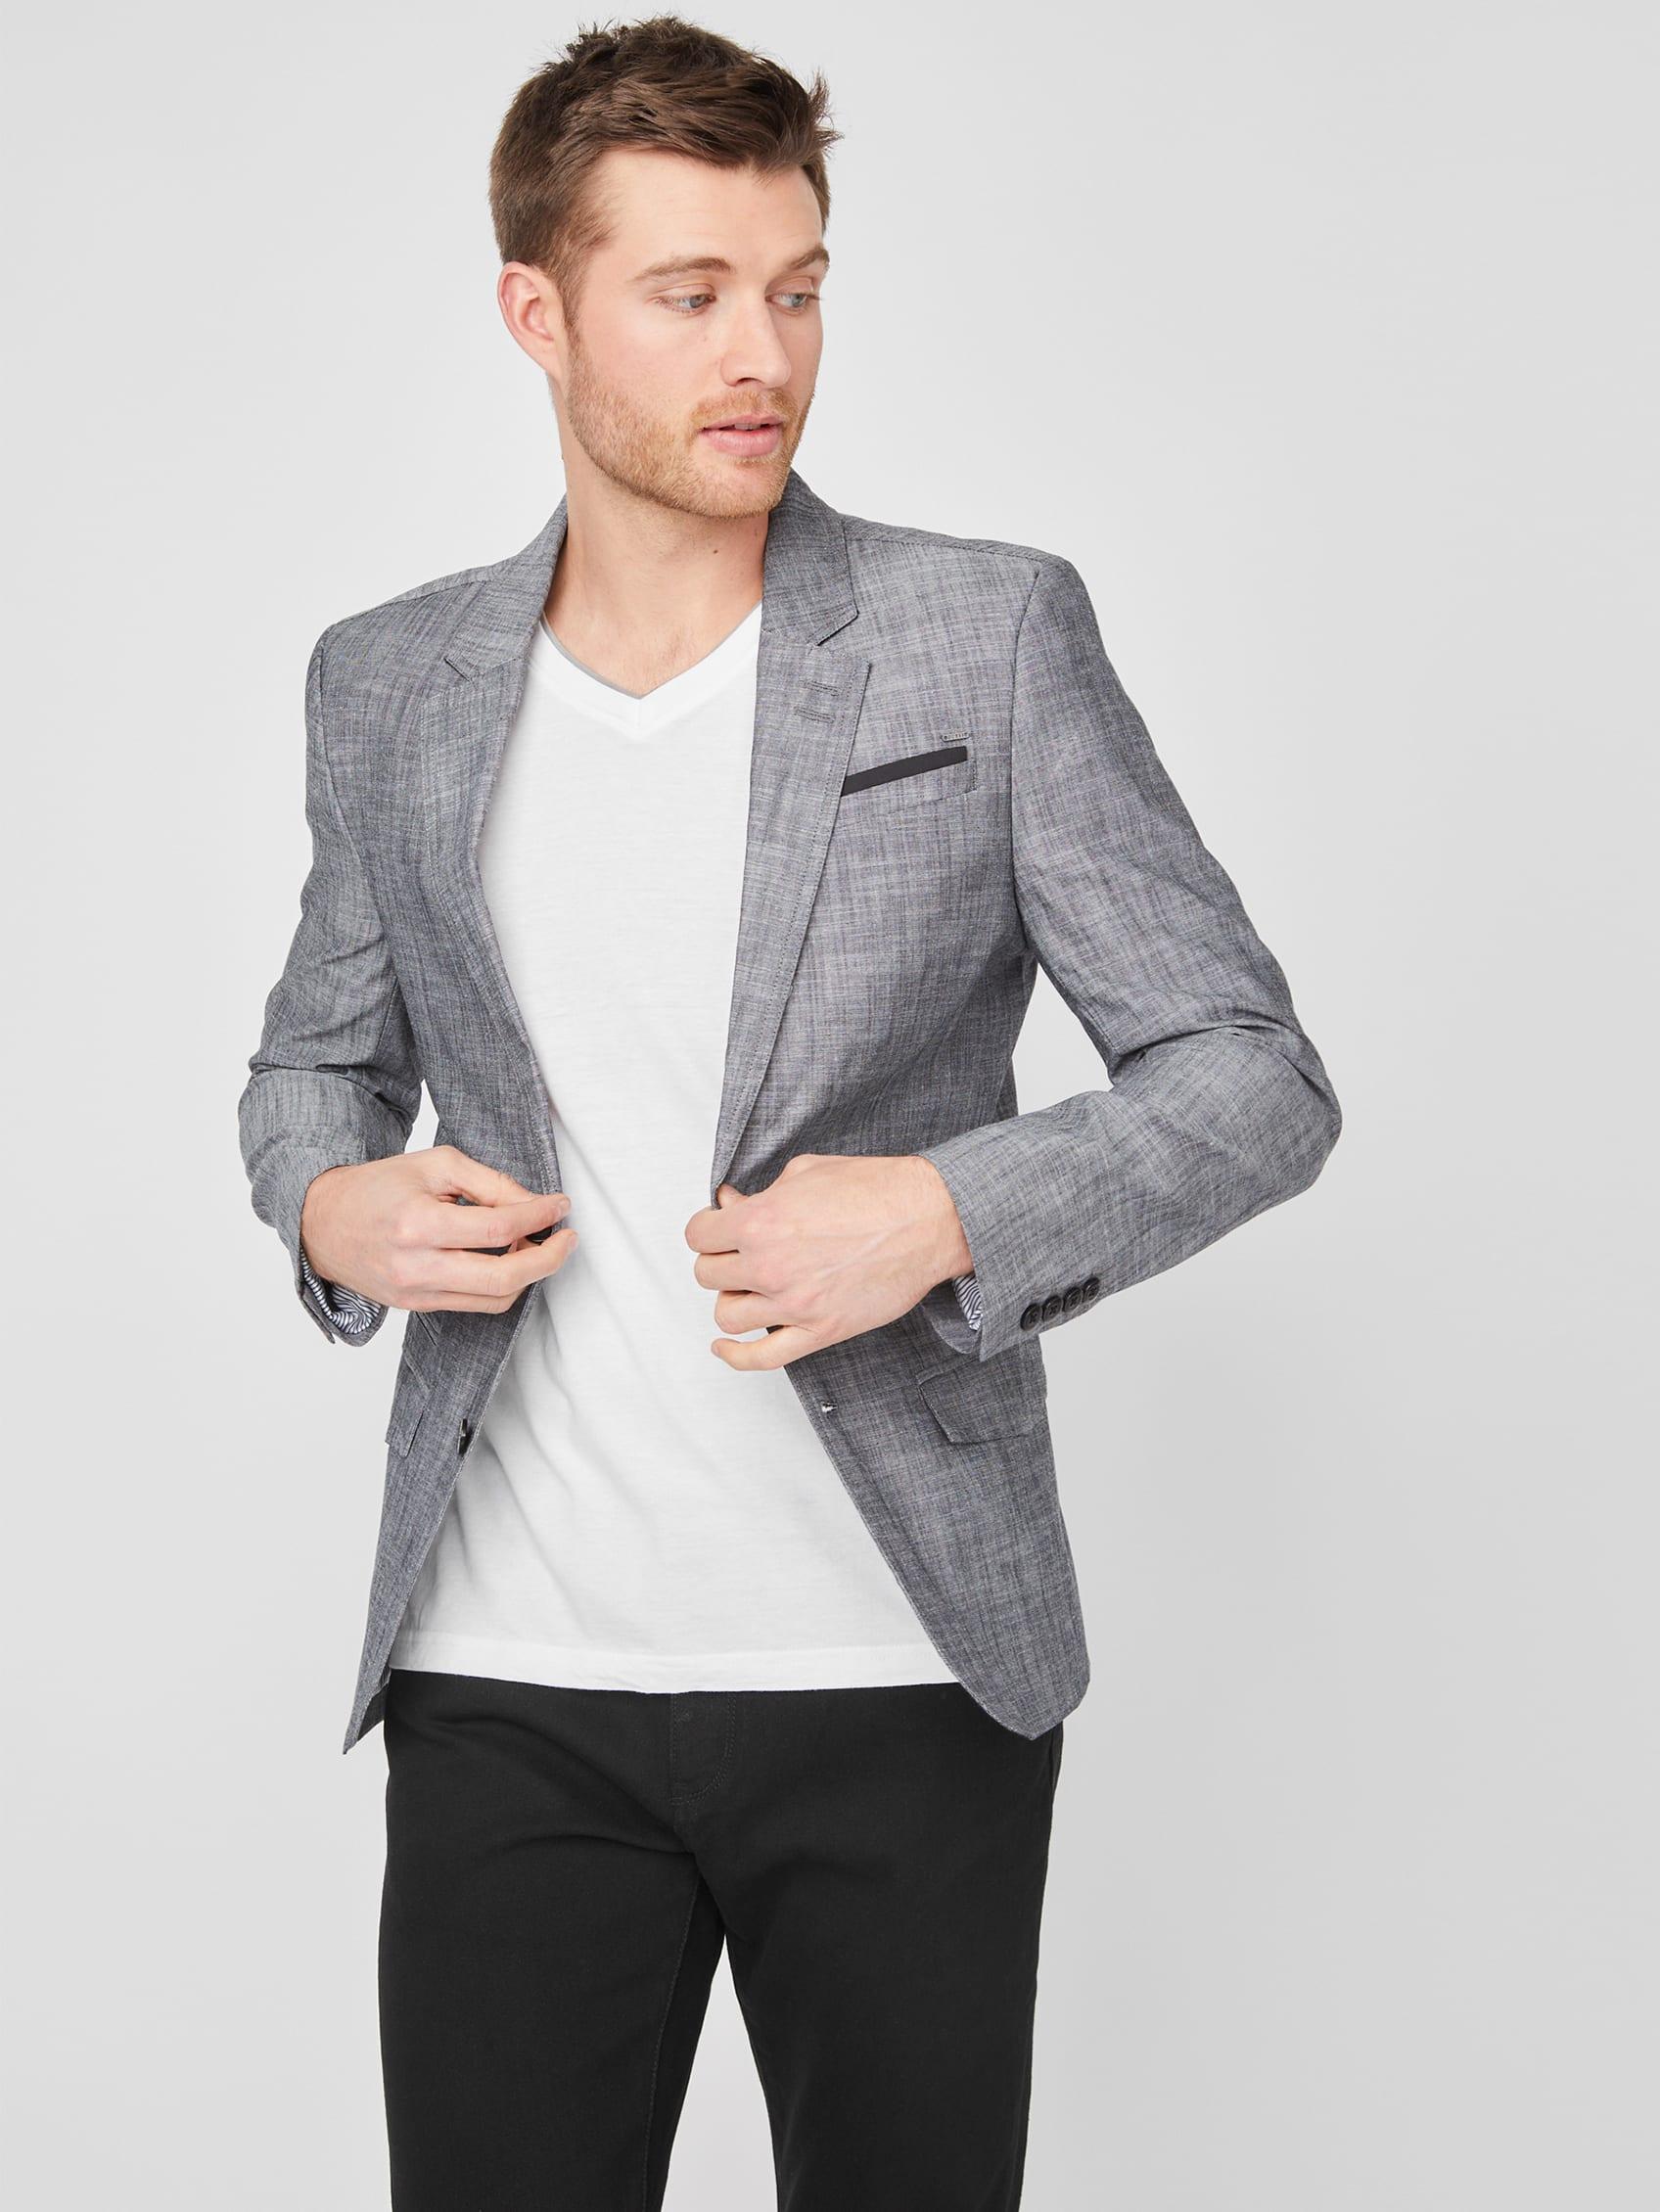 Guess Factory Sanders Chambray Blazer in Black for Men | Lyst